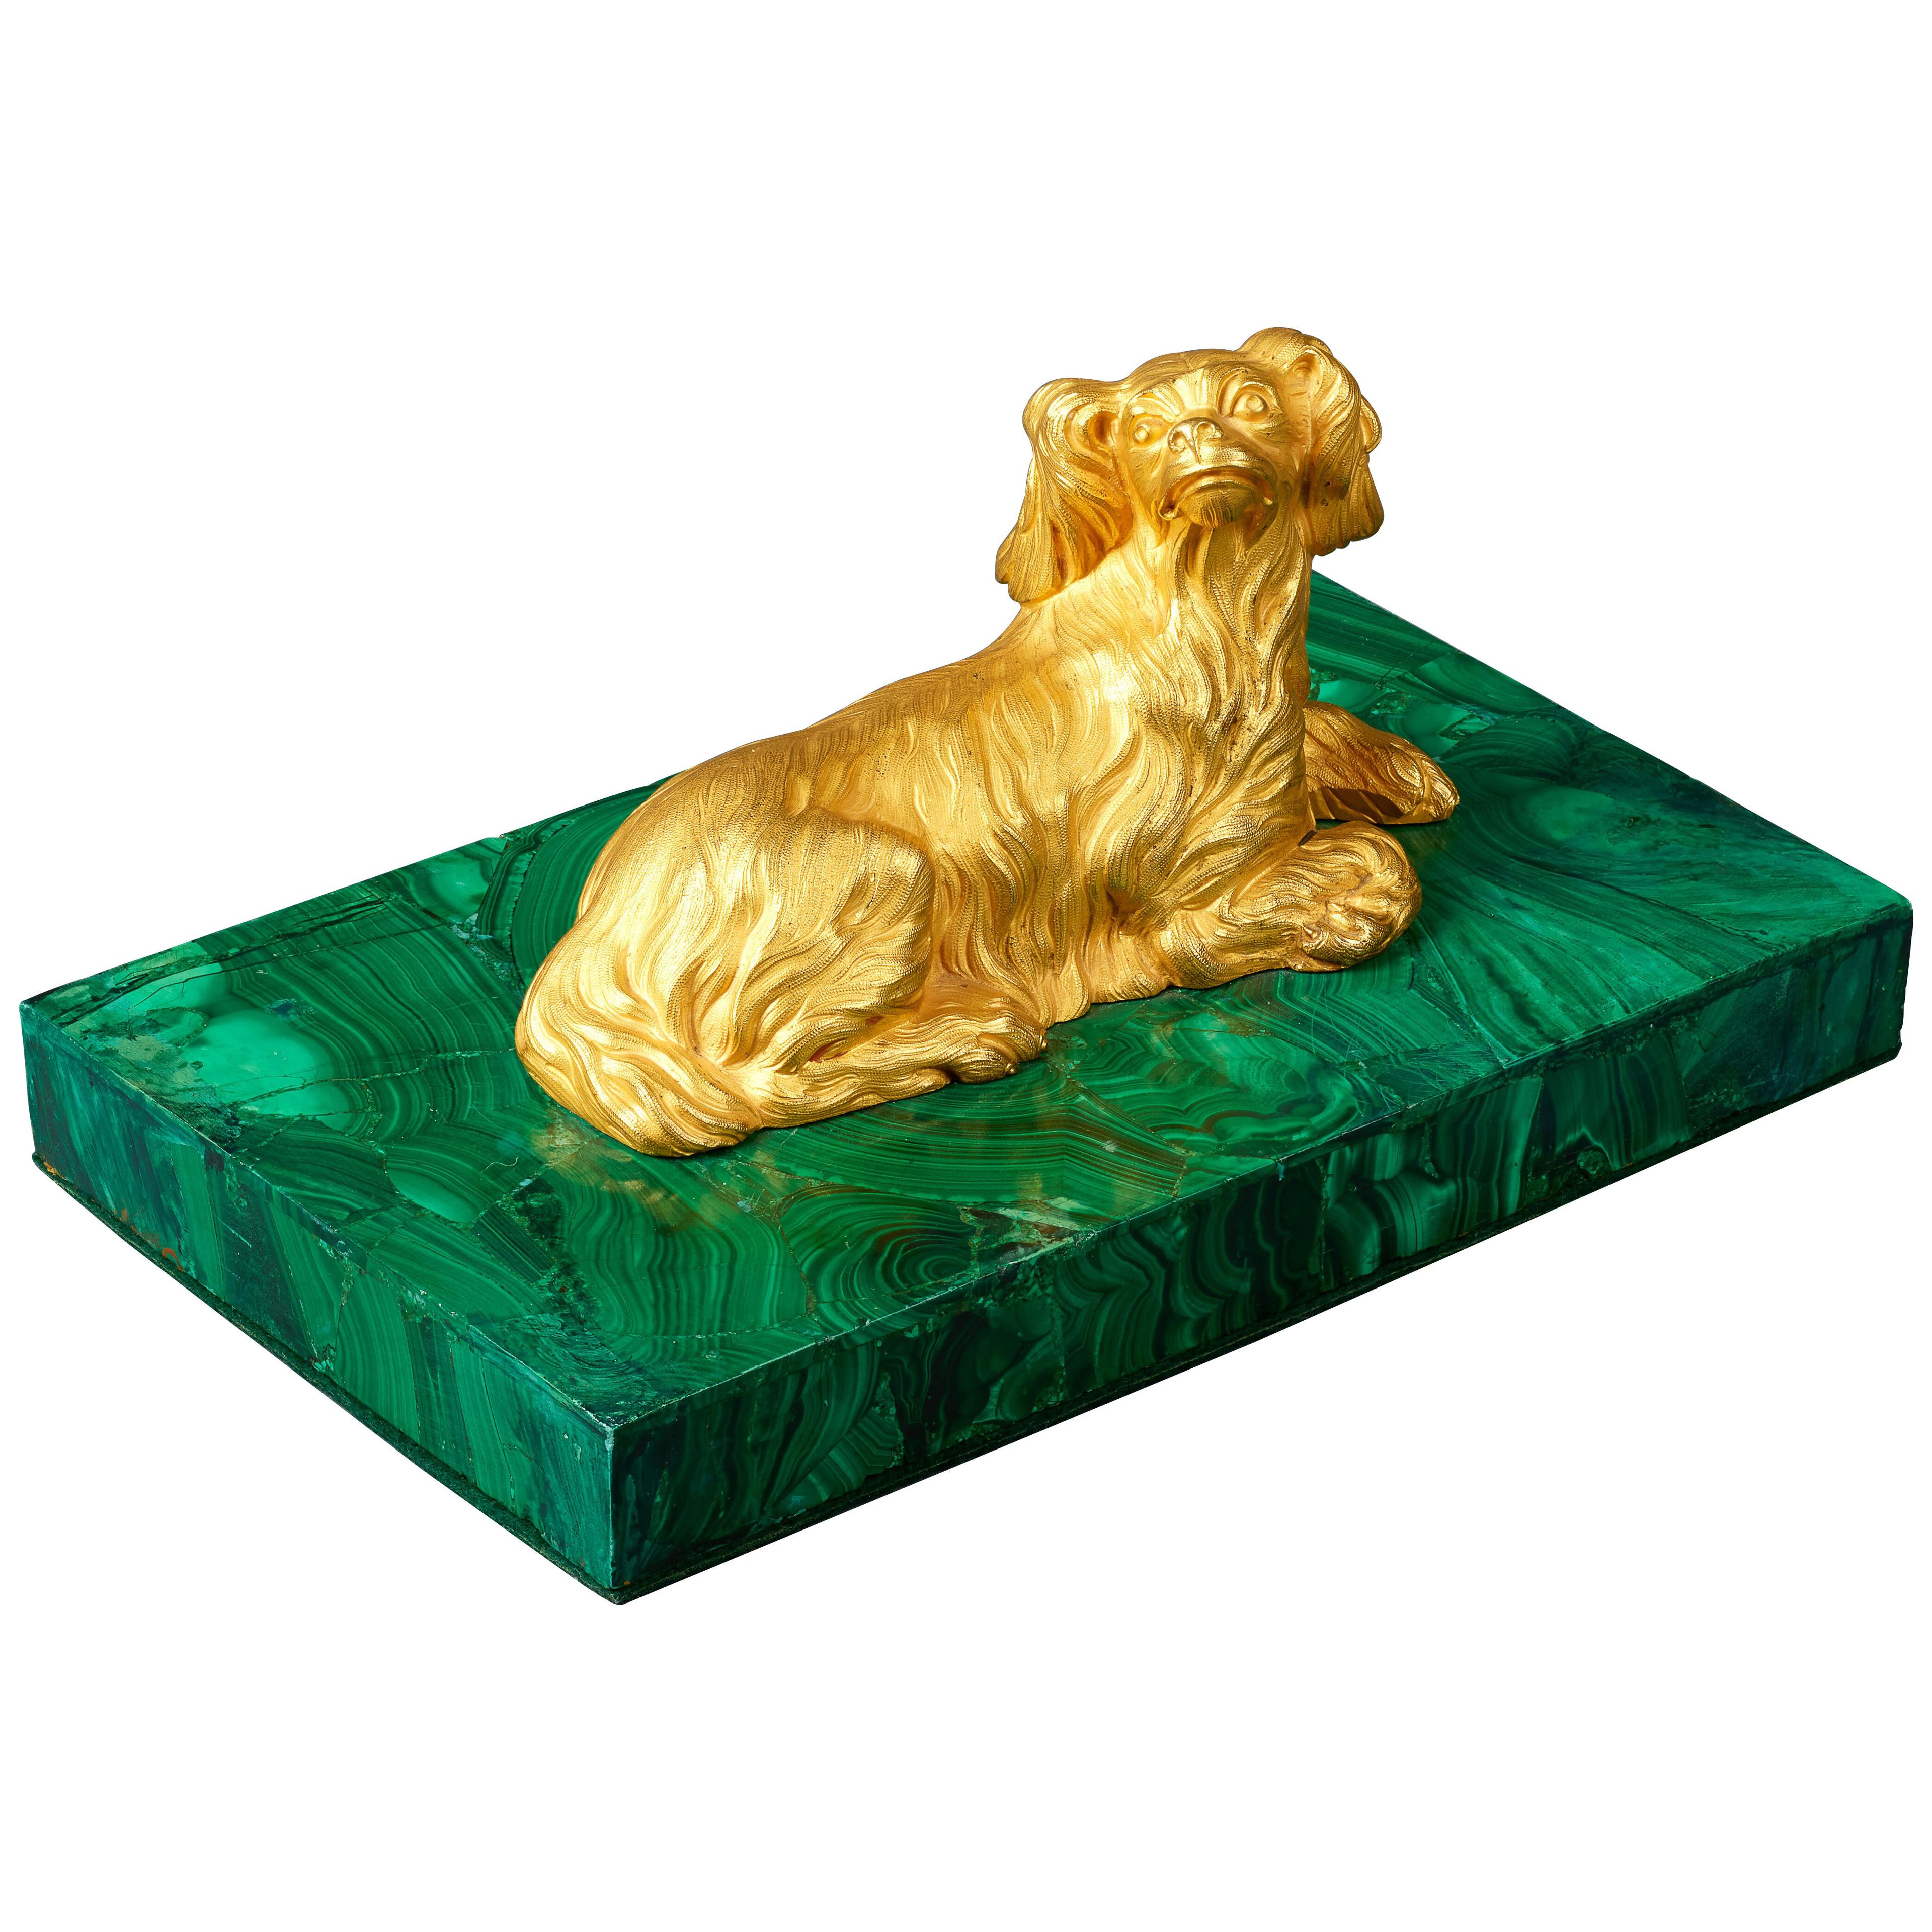 Early 19th Century Empire Russian Malachite and Ormolu Paperweight Spaniel Dog